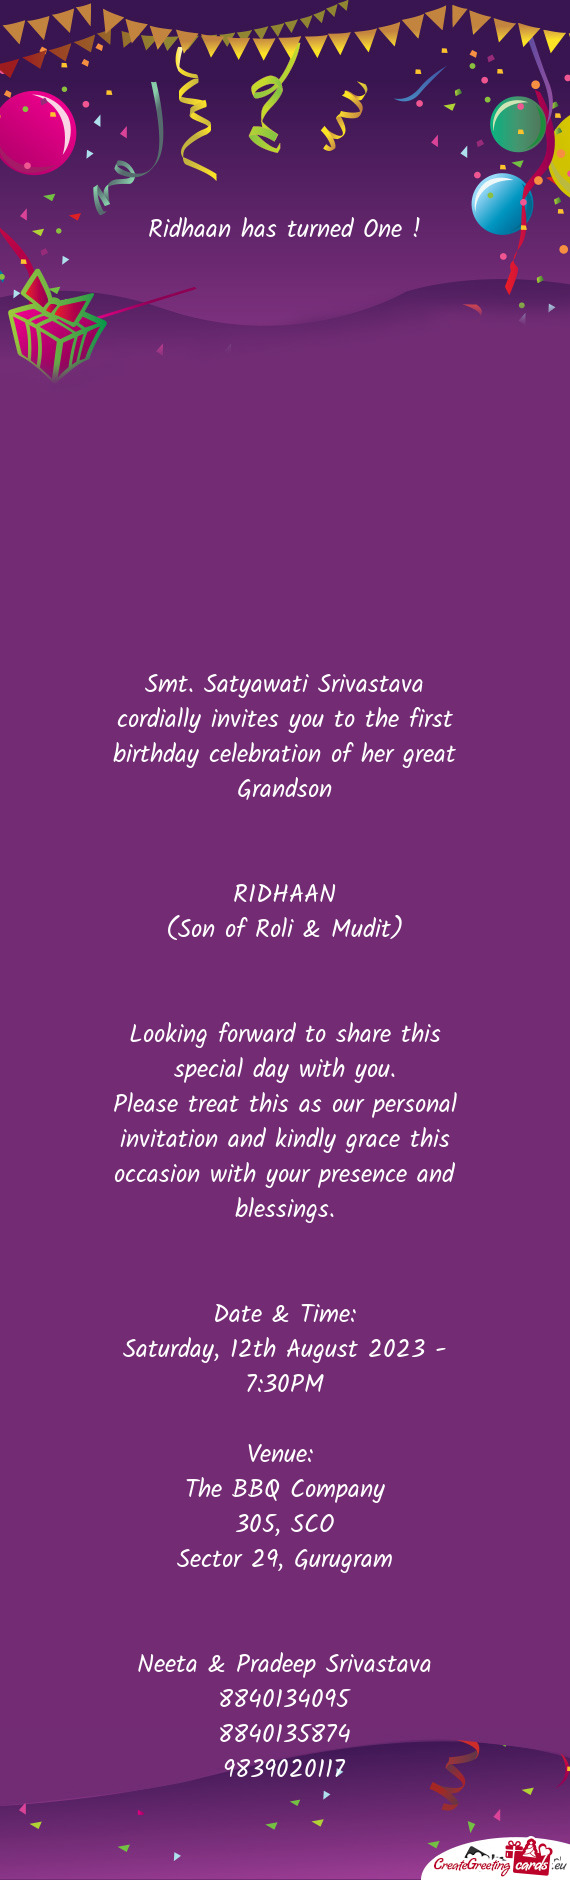 RIDHAAN (Son of Roli & Mudit)  Looking forward to share this special day with you